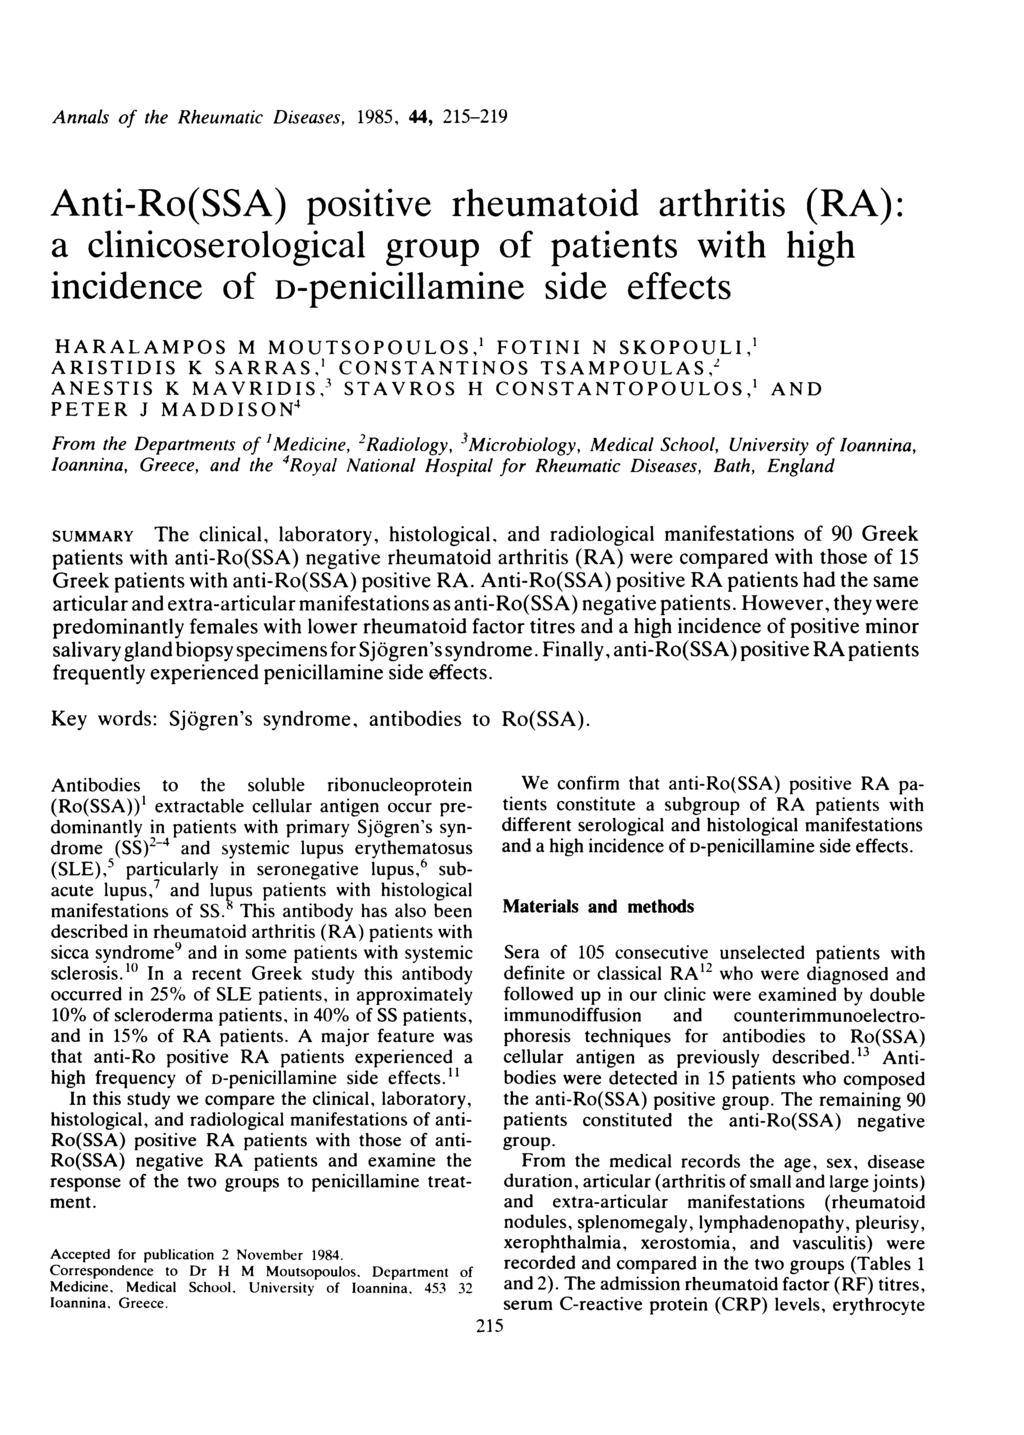 Annals of the Rheu)natic Diseases, 1985, 44, 215-219 Anti-Ro(SSA) positive rheumatoid arthritis (RA): a clinicoserological group of patients with high incidence of D-penicillamine side effects